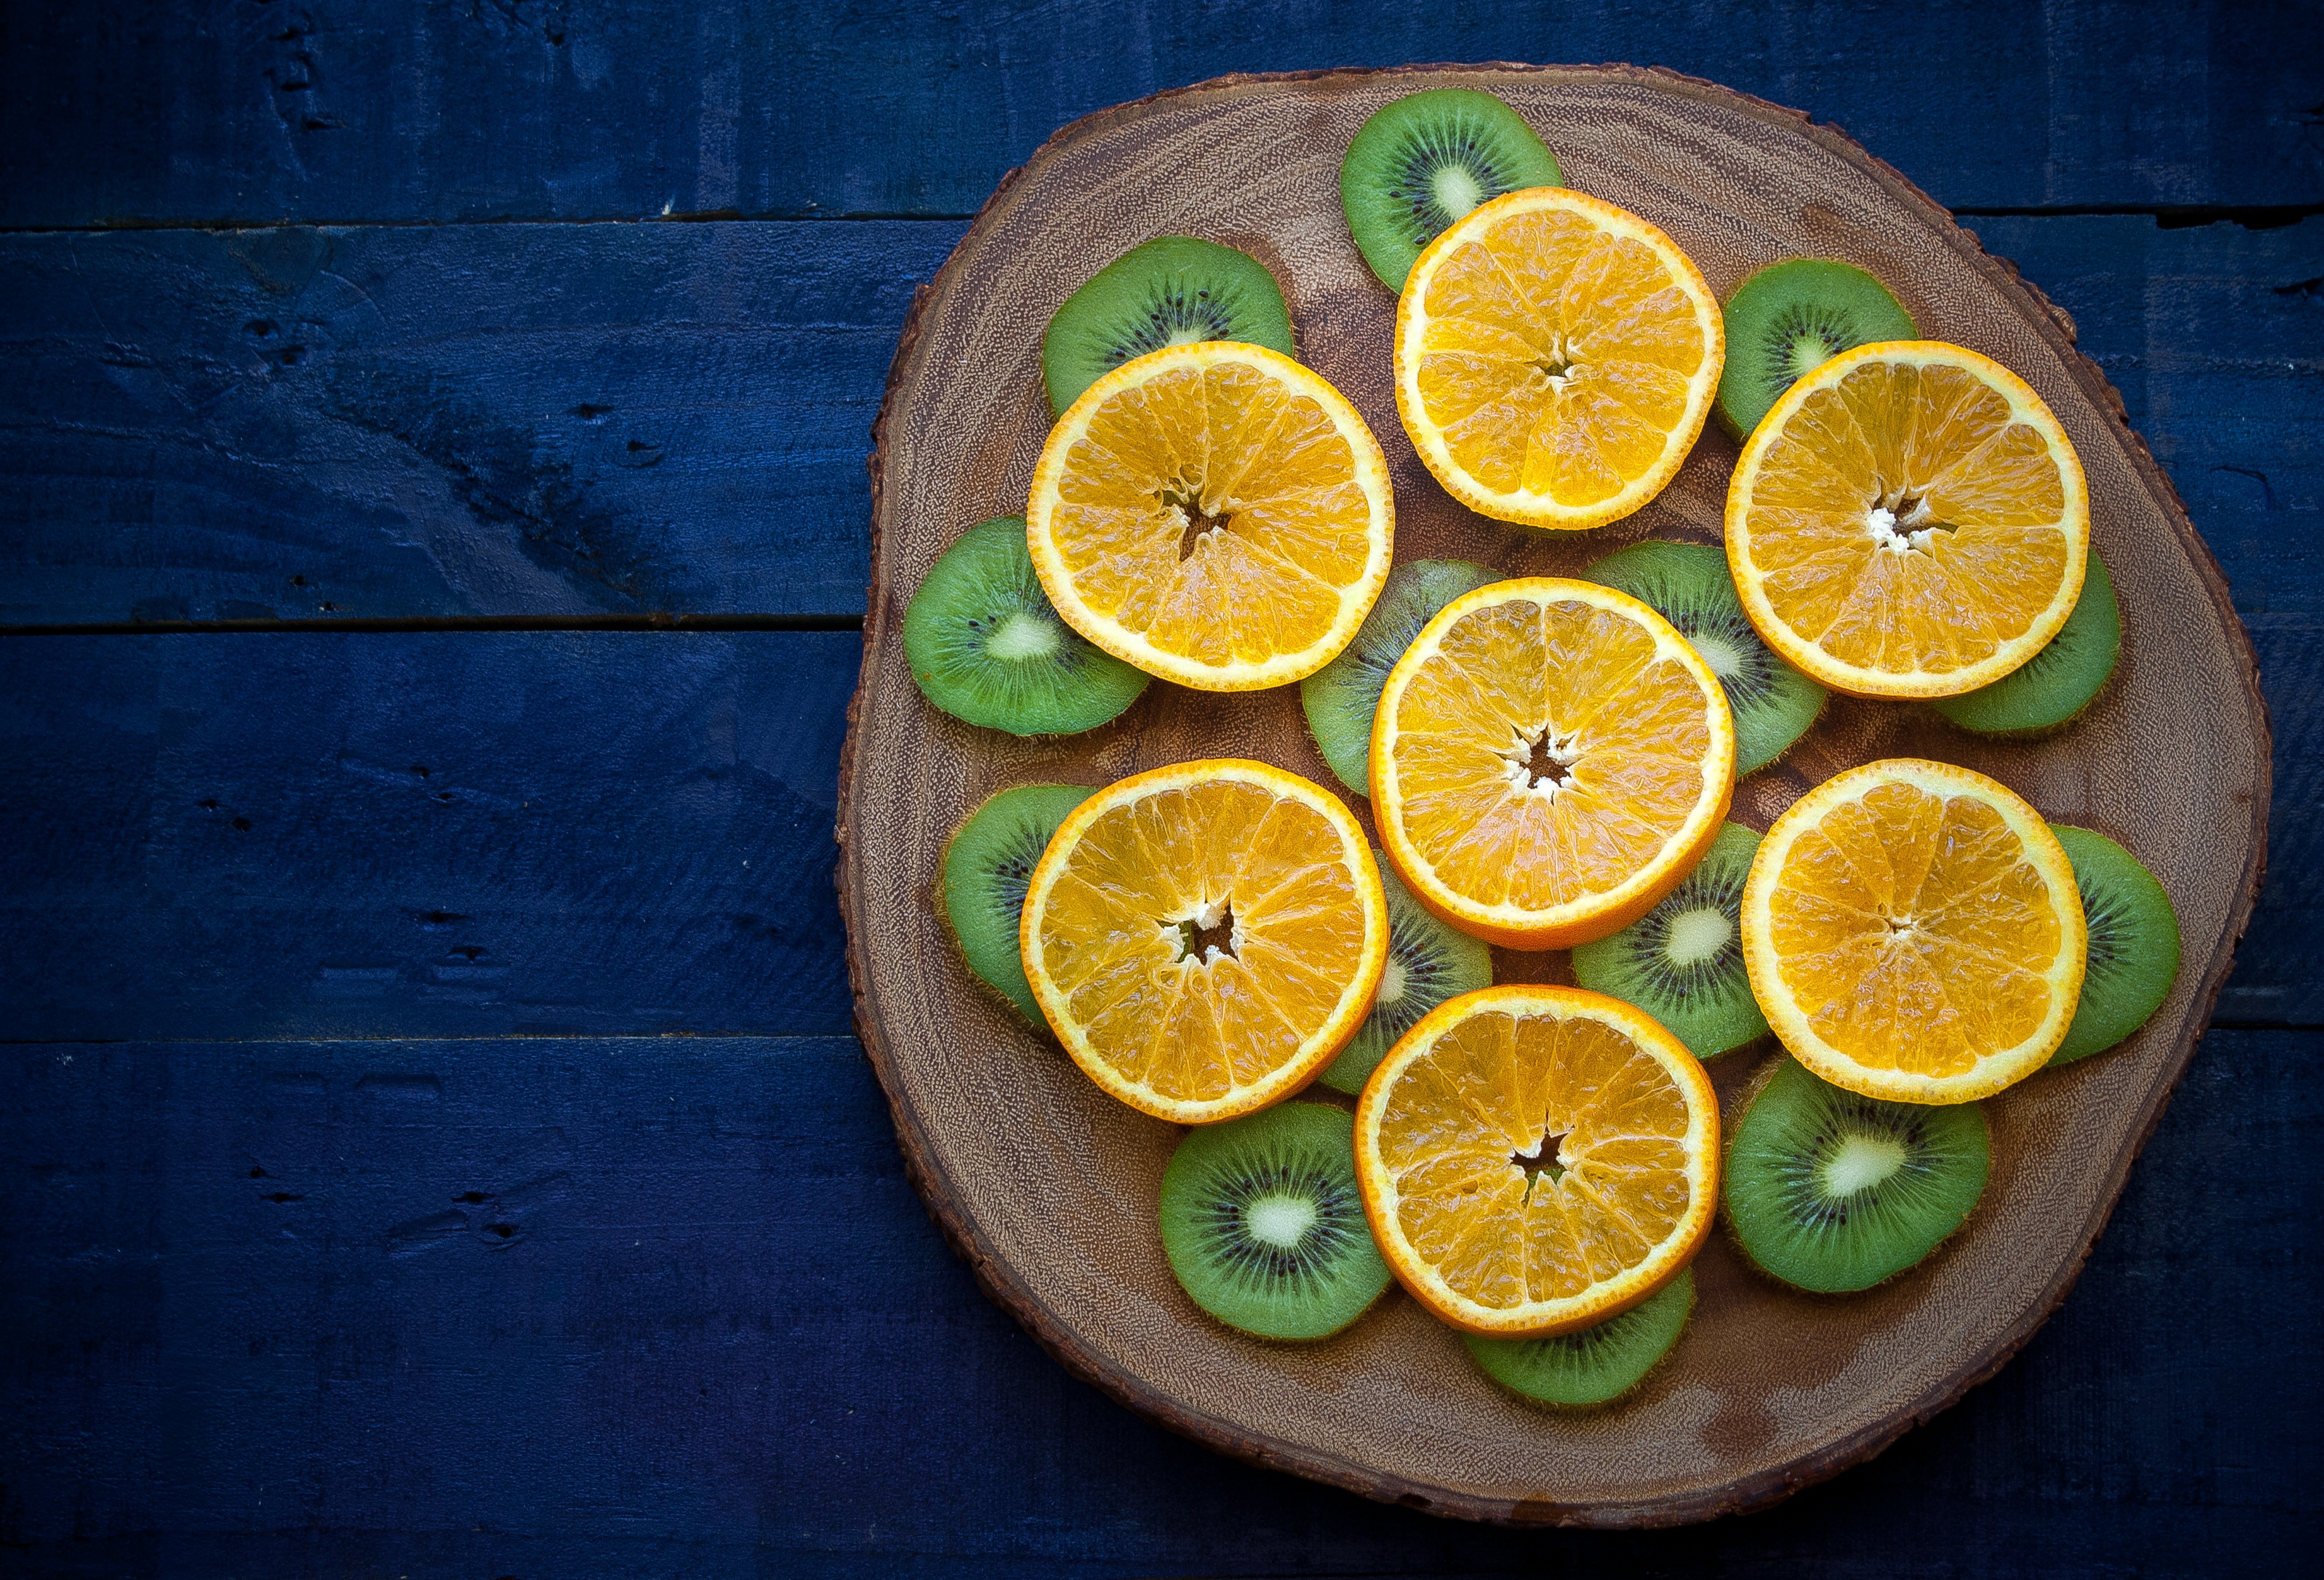 56322 download wallpaper food, oranges, kiwi, slicing, rifling, cutting board screensavers and pictures for free